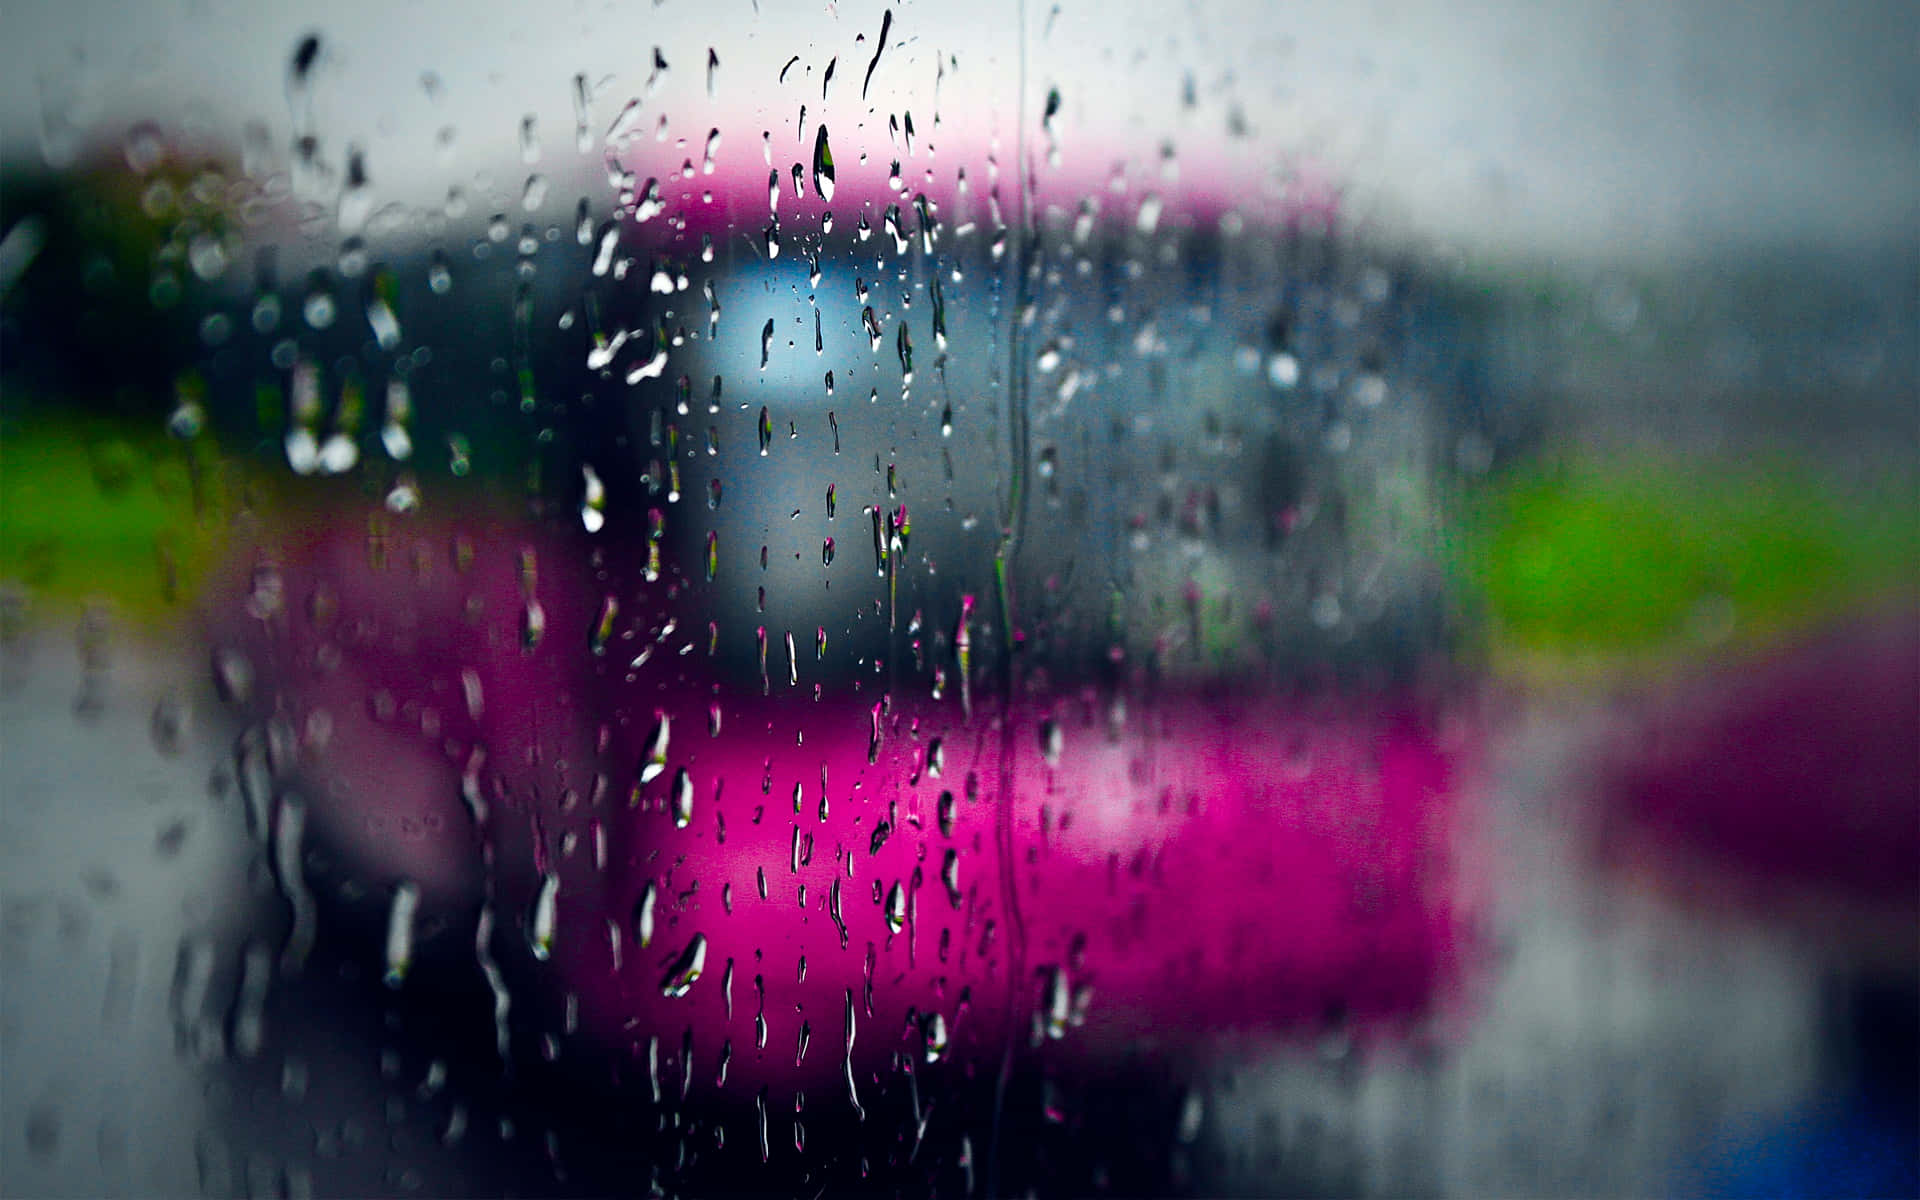 Enjoy a rainy day from the comfort of your desktop Wallpaper